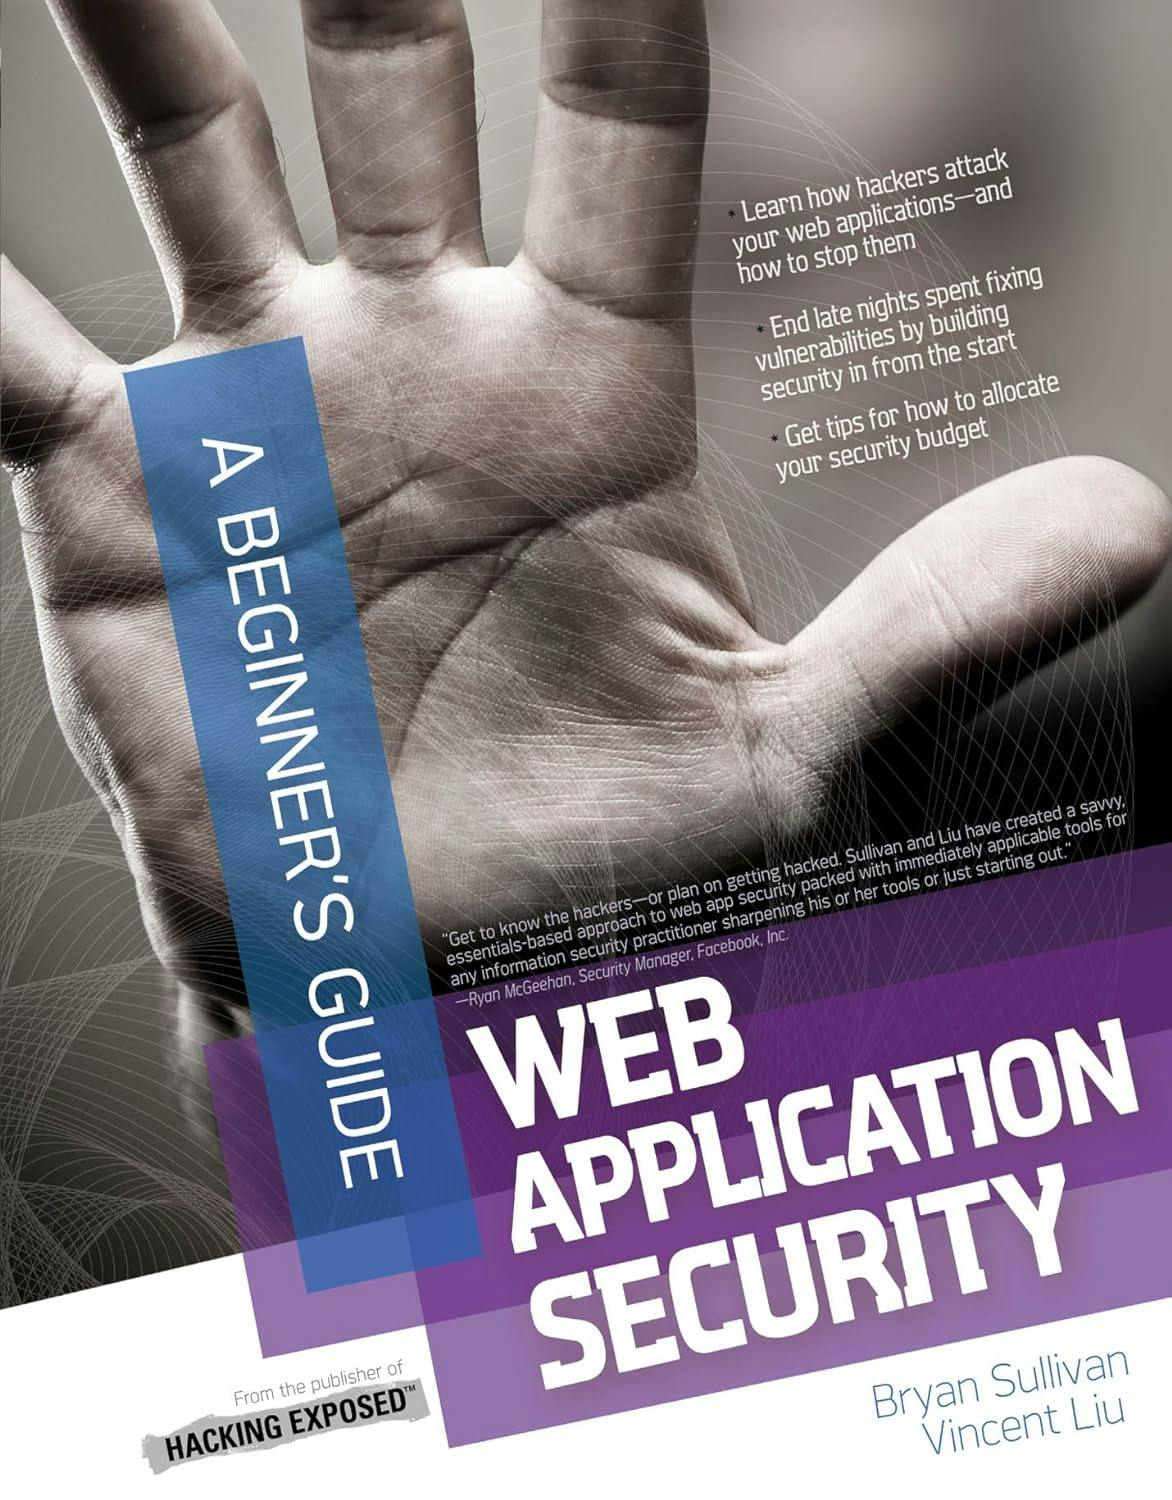 Cover of ‘Web Application Security: A Beginner’s Guide’ by Bryan Sullivan and Vincent Liu